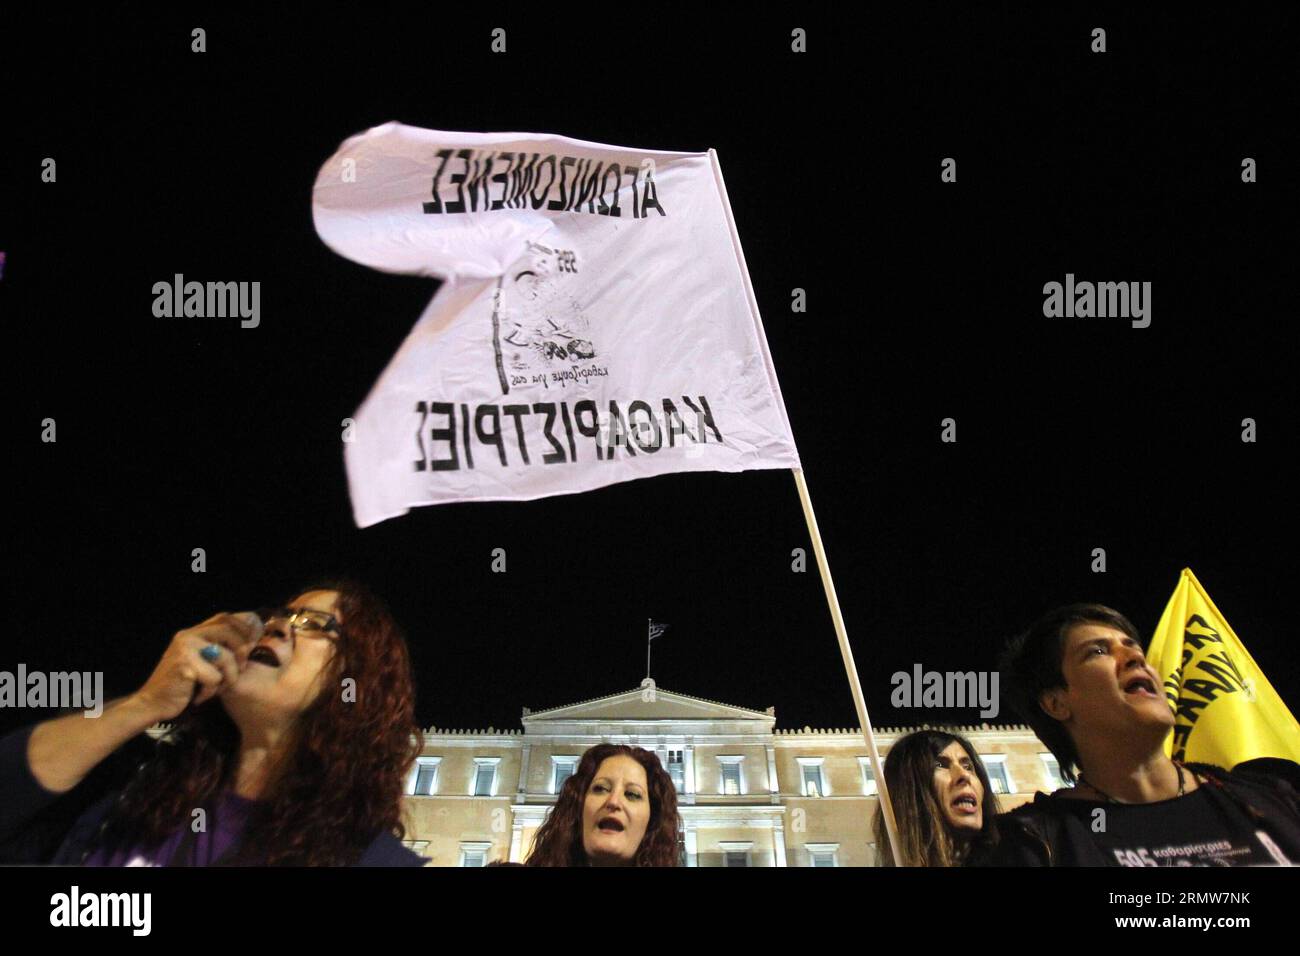 Protestors shout slogans outside the Greek Parliament building during a rally in Athens, Greece, Oct. 10, 2014. Greek Parliament will vote Friday on a confidence motion proposed by Greek Government. According to local political analysts, the government is expected to easily win the roll-call vote sought by Greek Prime Minister Antonis Samaras in an effort to halt early general elections. ) GREECE-ATHENS-POLITICS-CONFIDENCE-VOTE MariosxLolos PUBLICATIONxNOTxINxCHN   protestors Shout Slogans outside The Greek Parliament Building during a Rally in Athens Greece OCT 10 2014 Greek Parliament will V Stock Photo